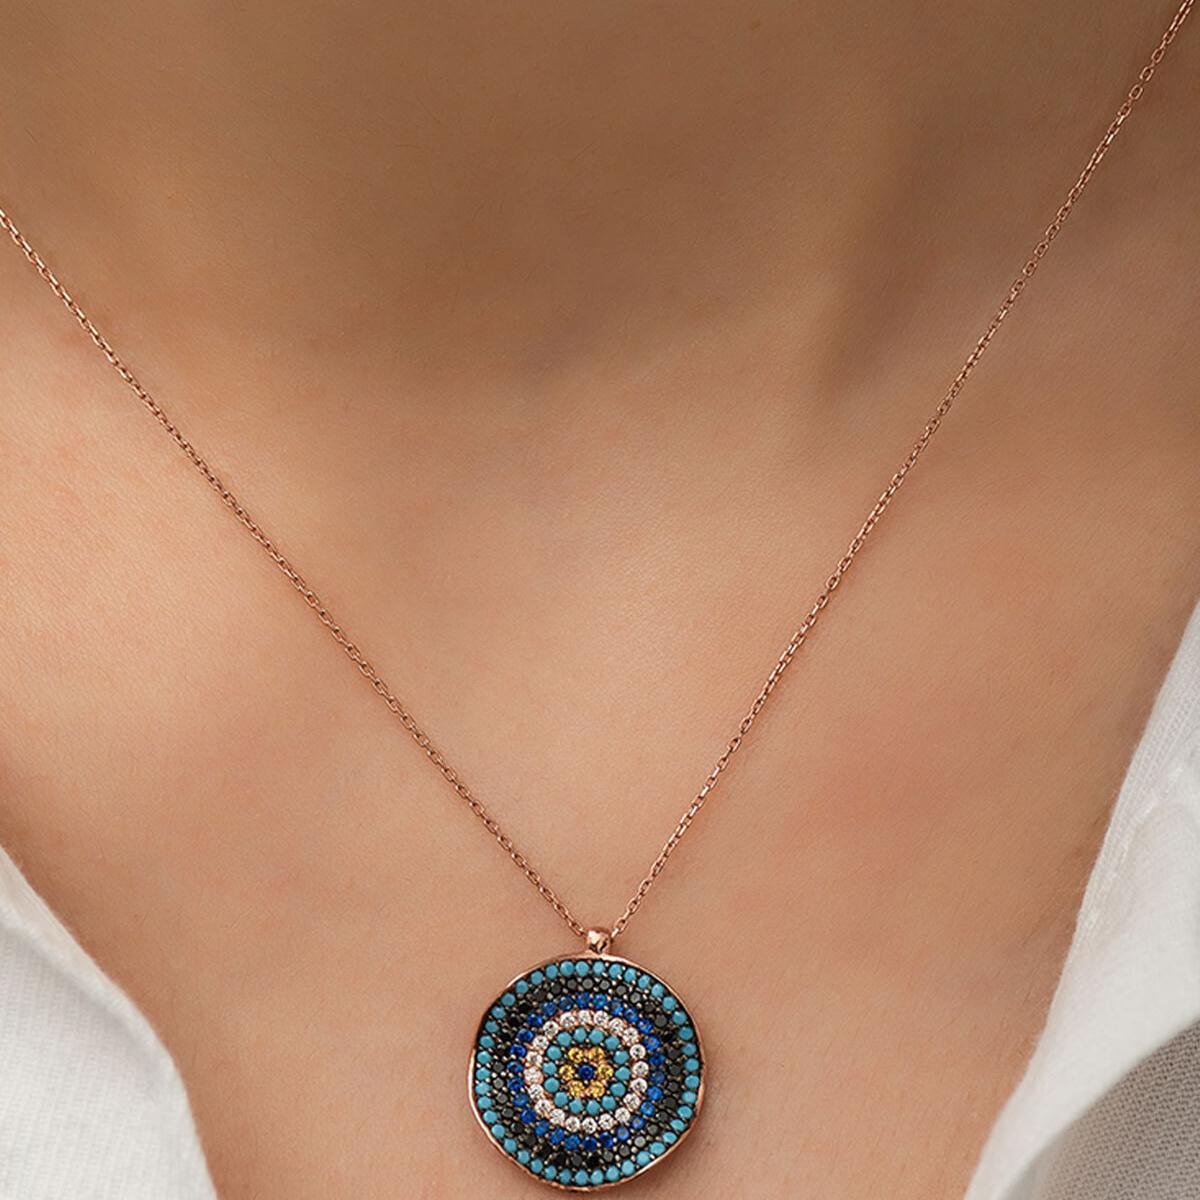 Italian Evil Eye Necklace • Evil Eye Protection Necklace - Trending Silver Gifts